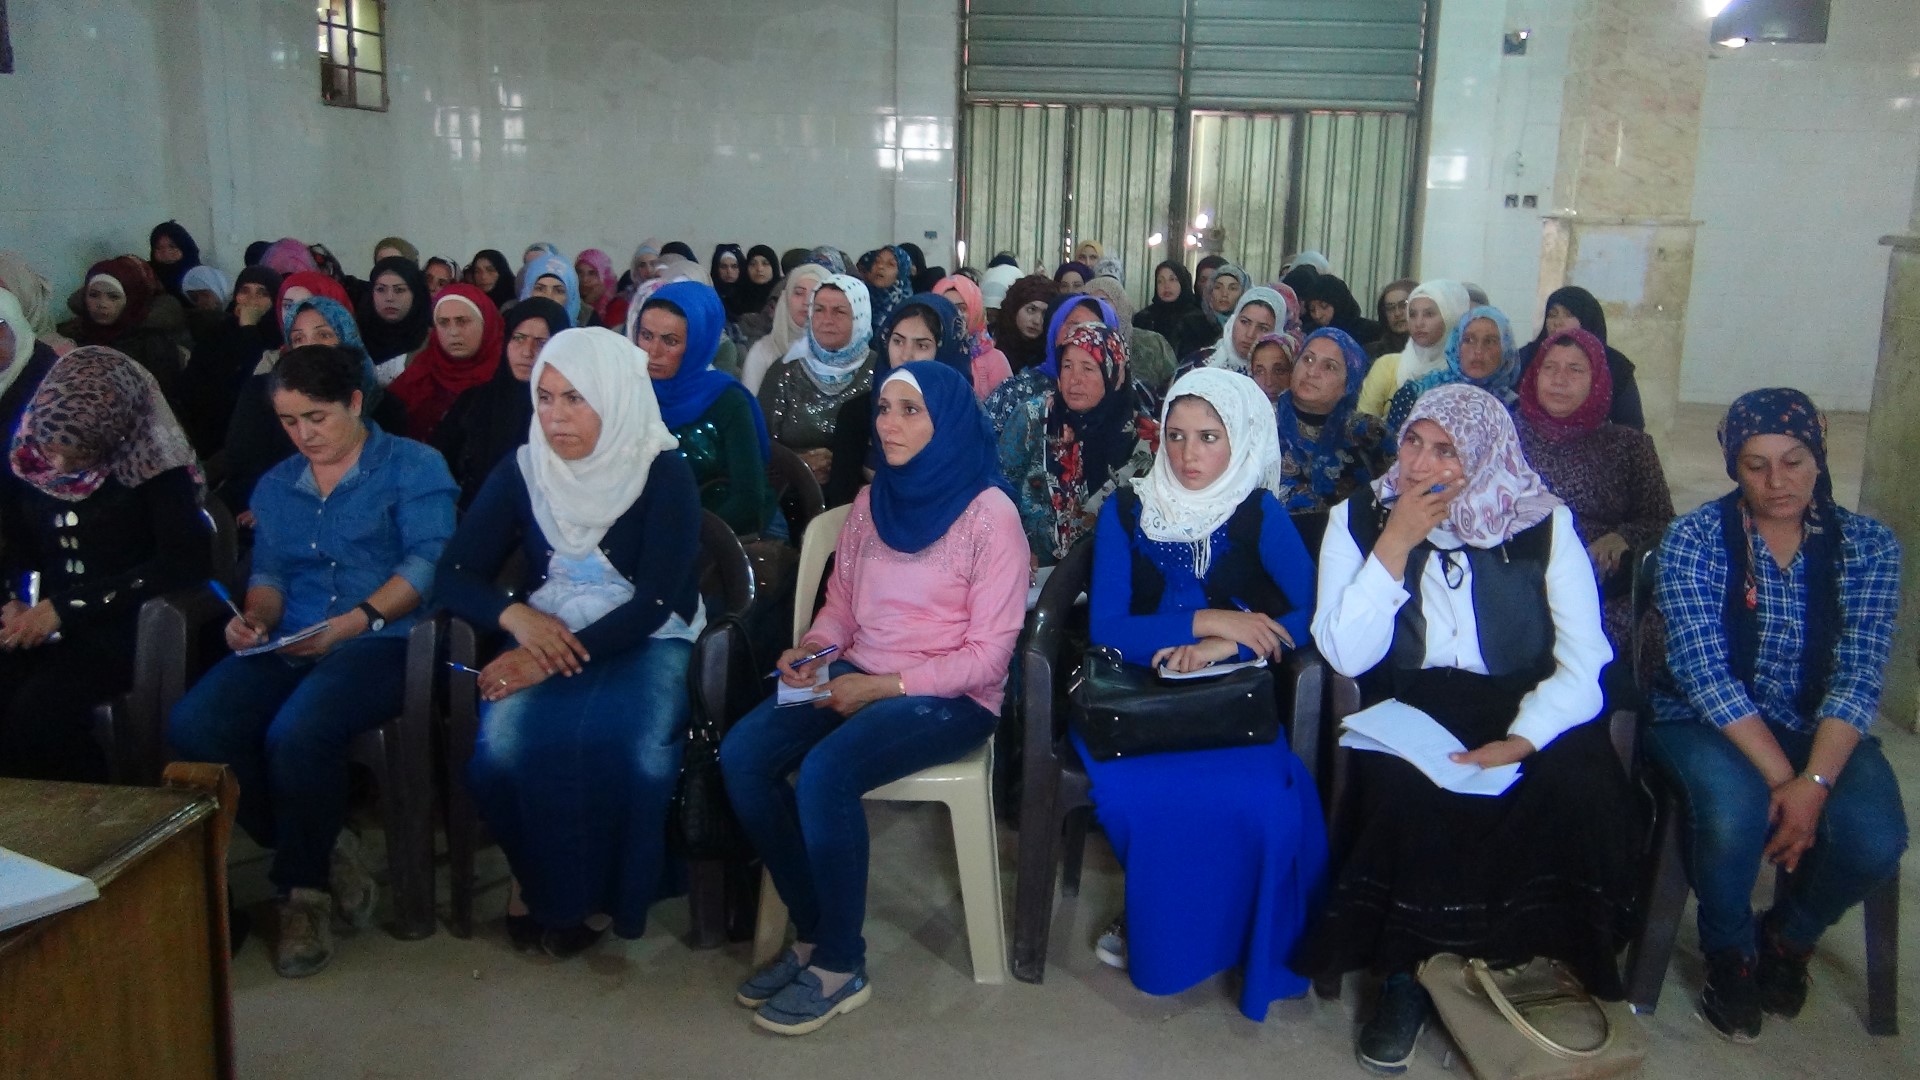 Free Women Union discussed developments in area